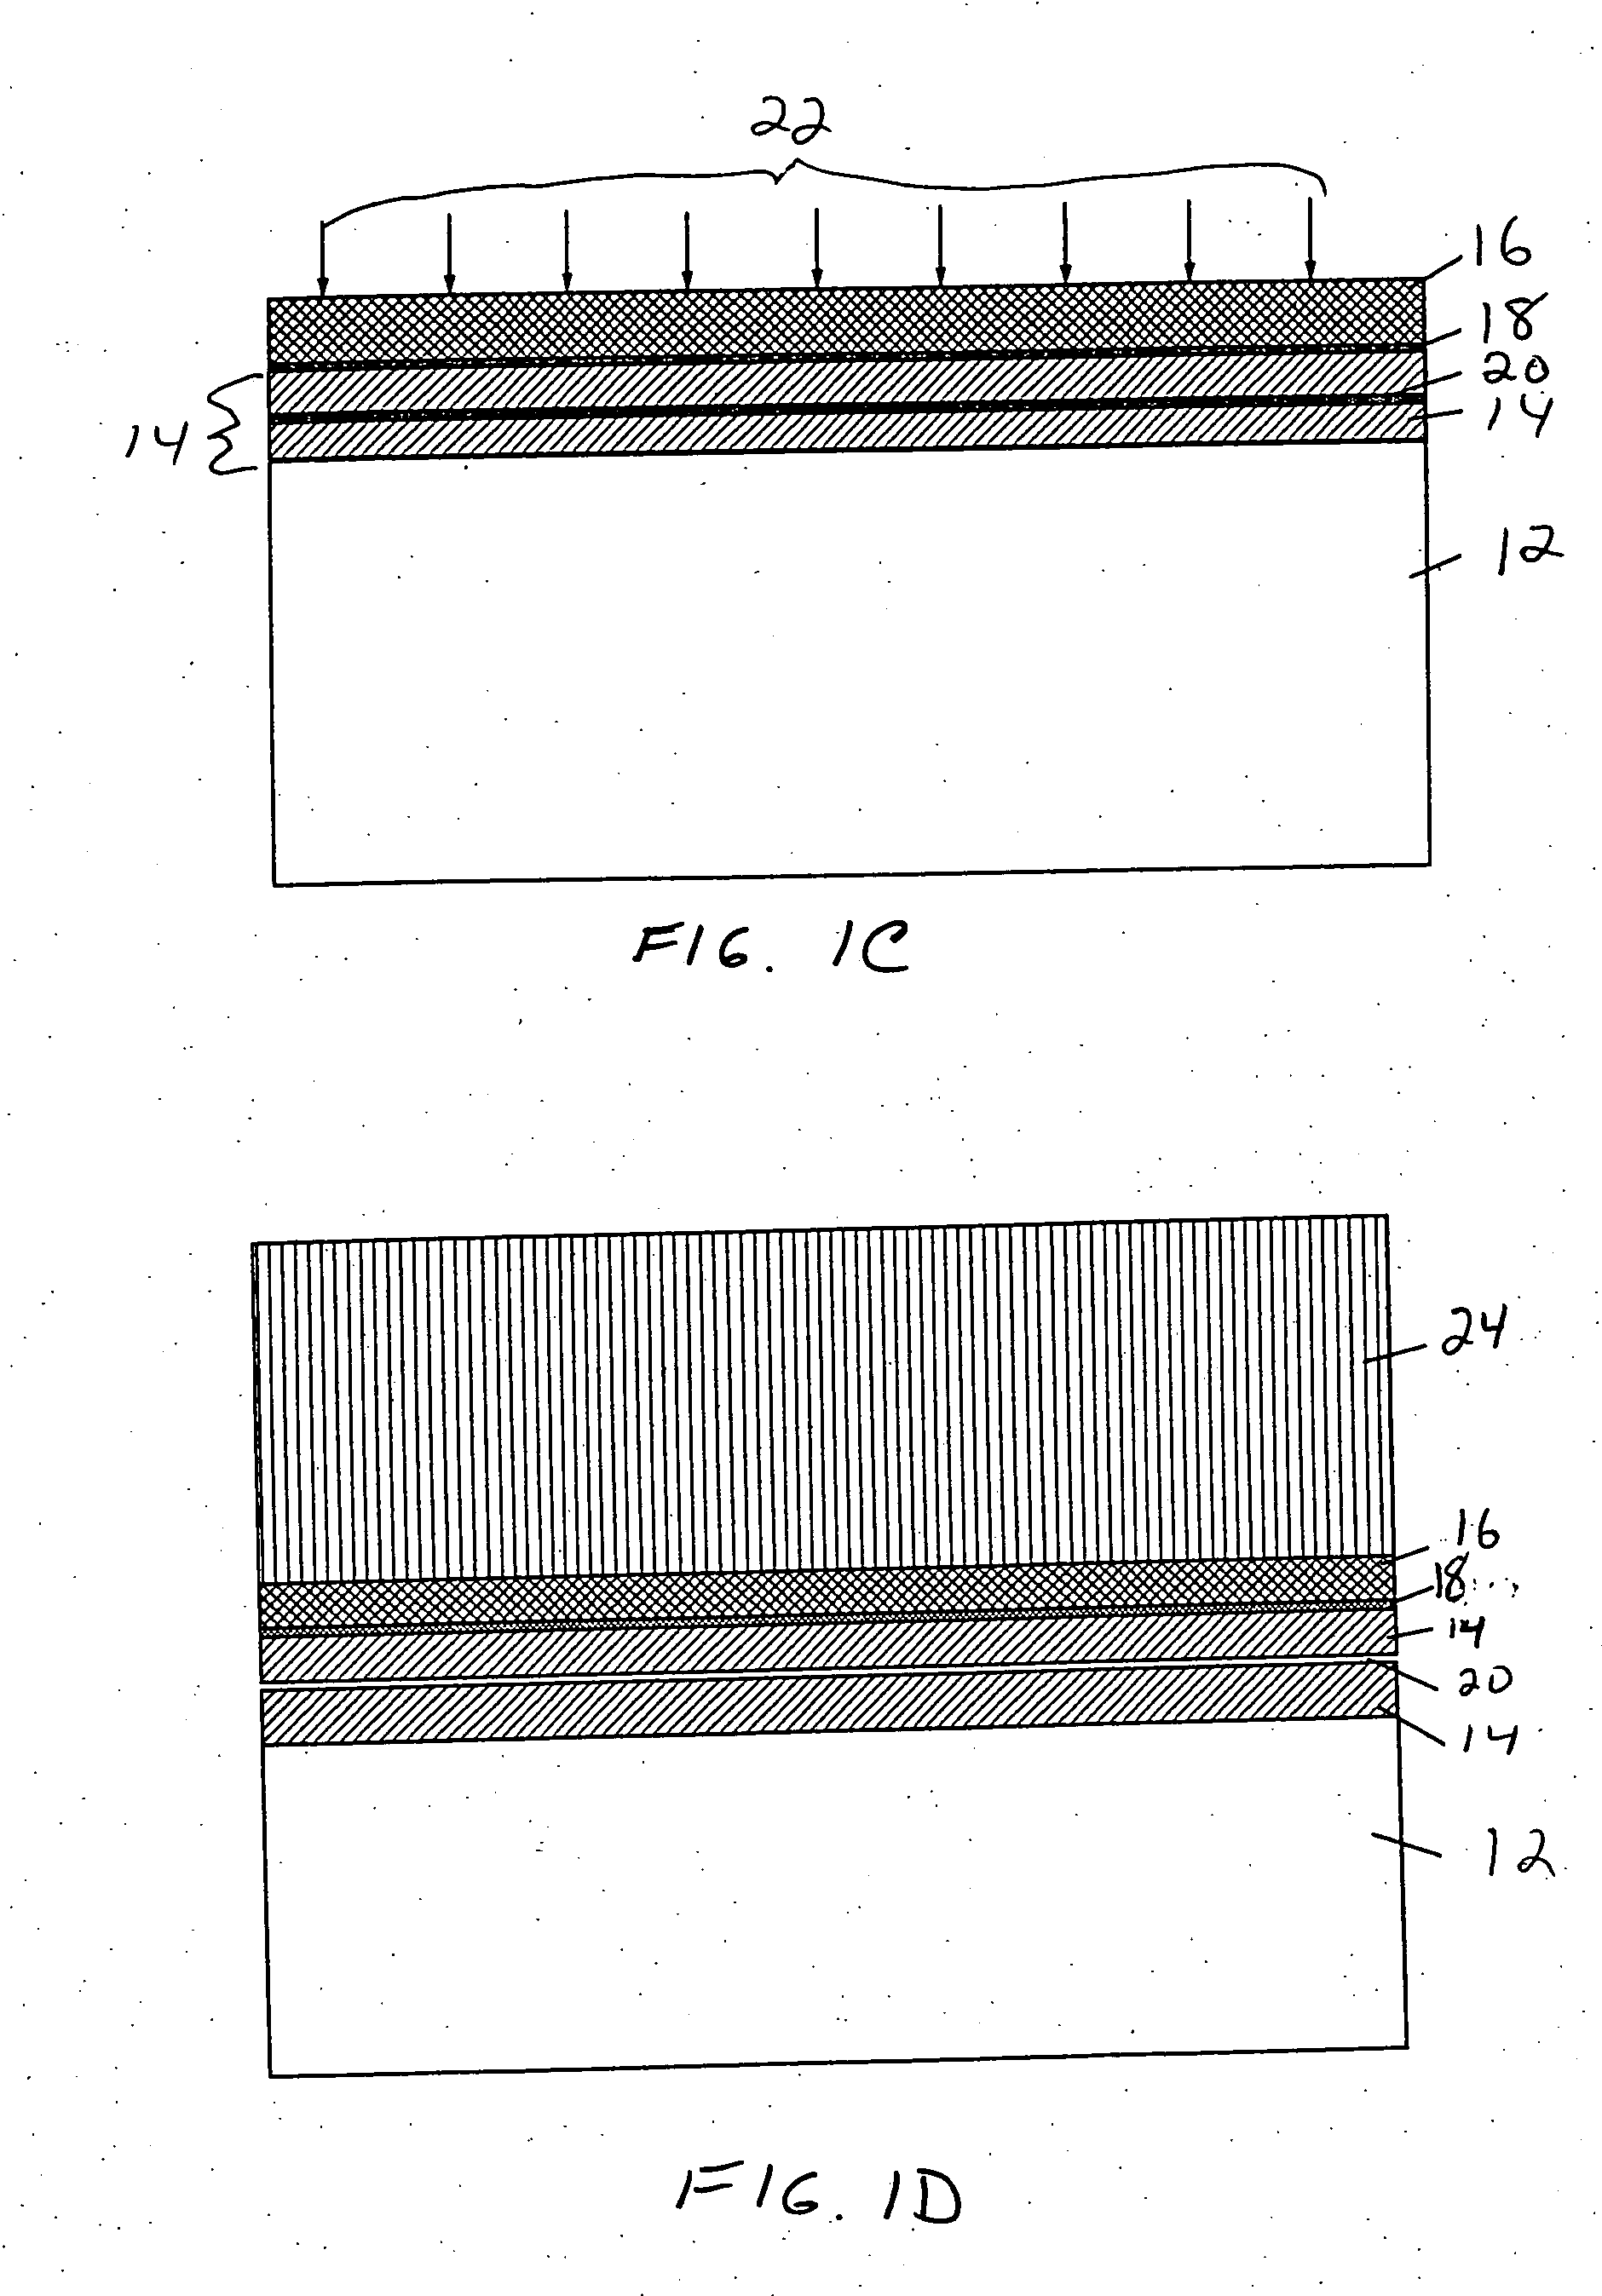 Method of creating defect free high Ge content (&gt;25%) SiGe-on-insulator (SGOI) substrates using wafer bonding techniques